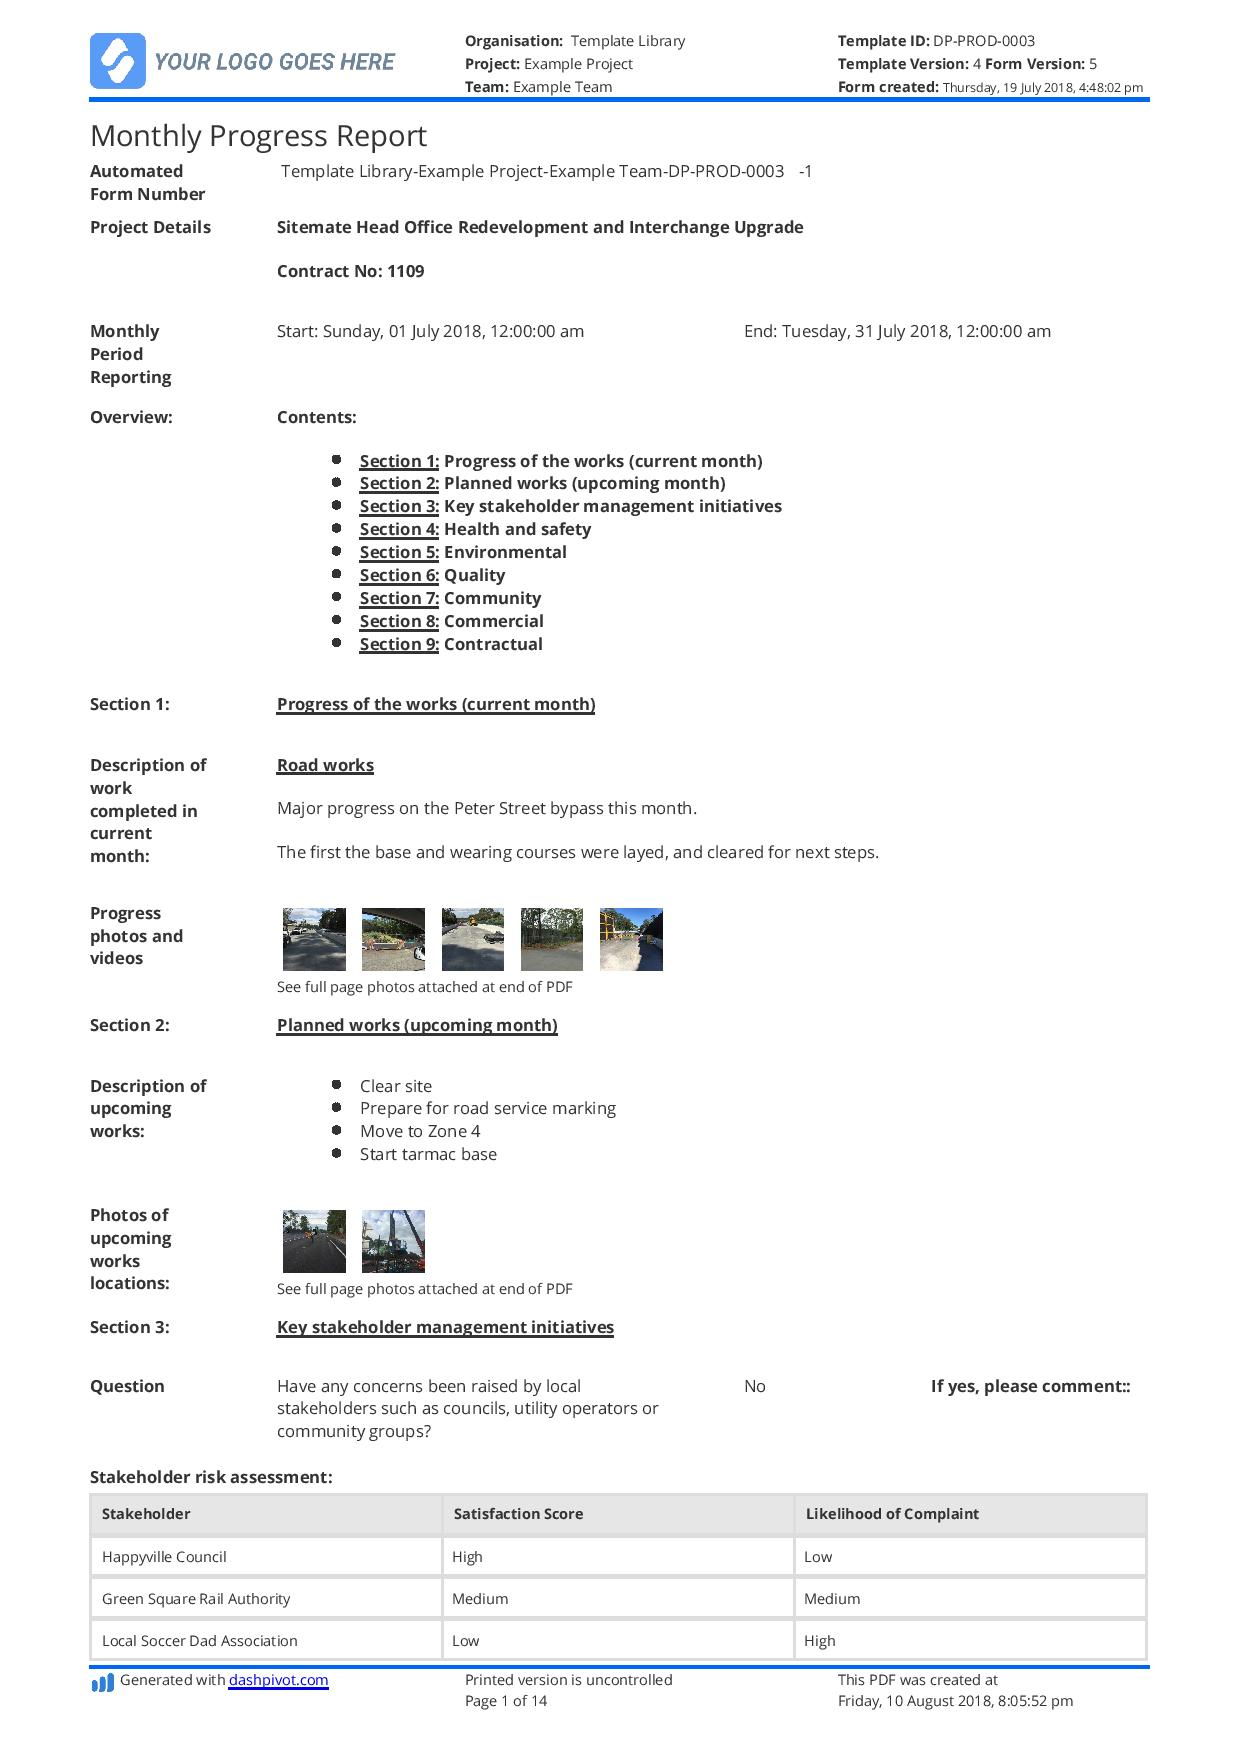 Monthly Construction Progress Report Template: Use This Intended For Engineering Progress Report Template